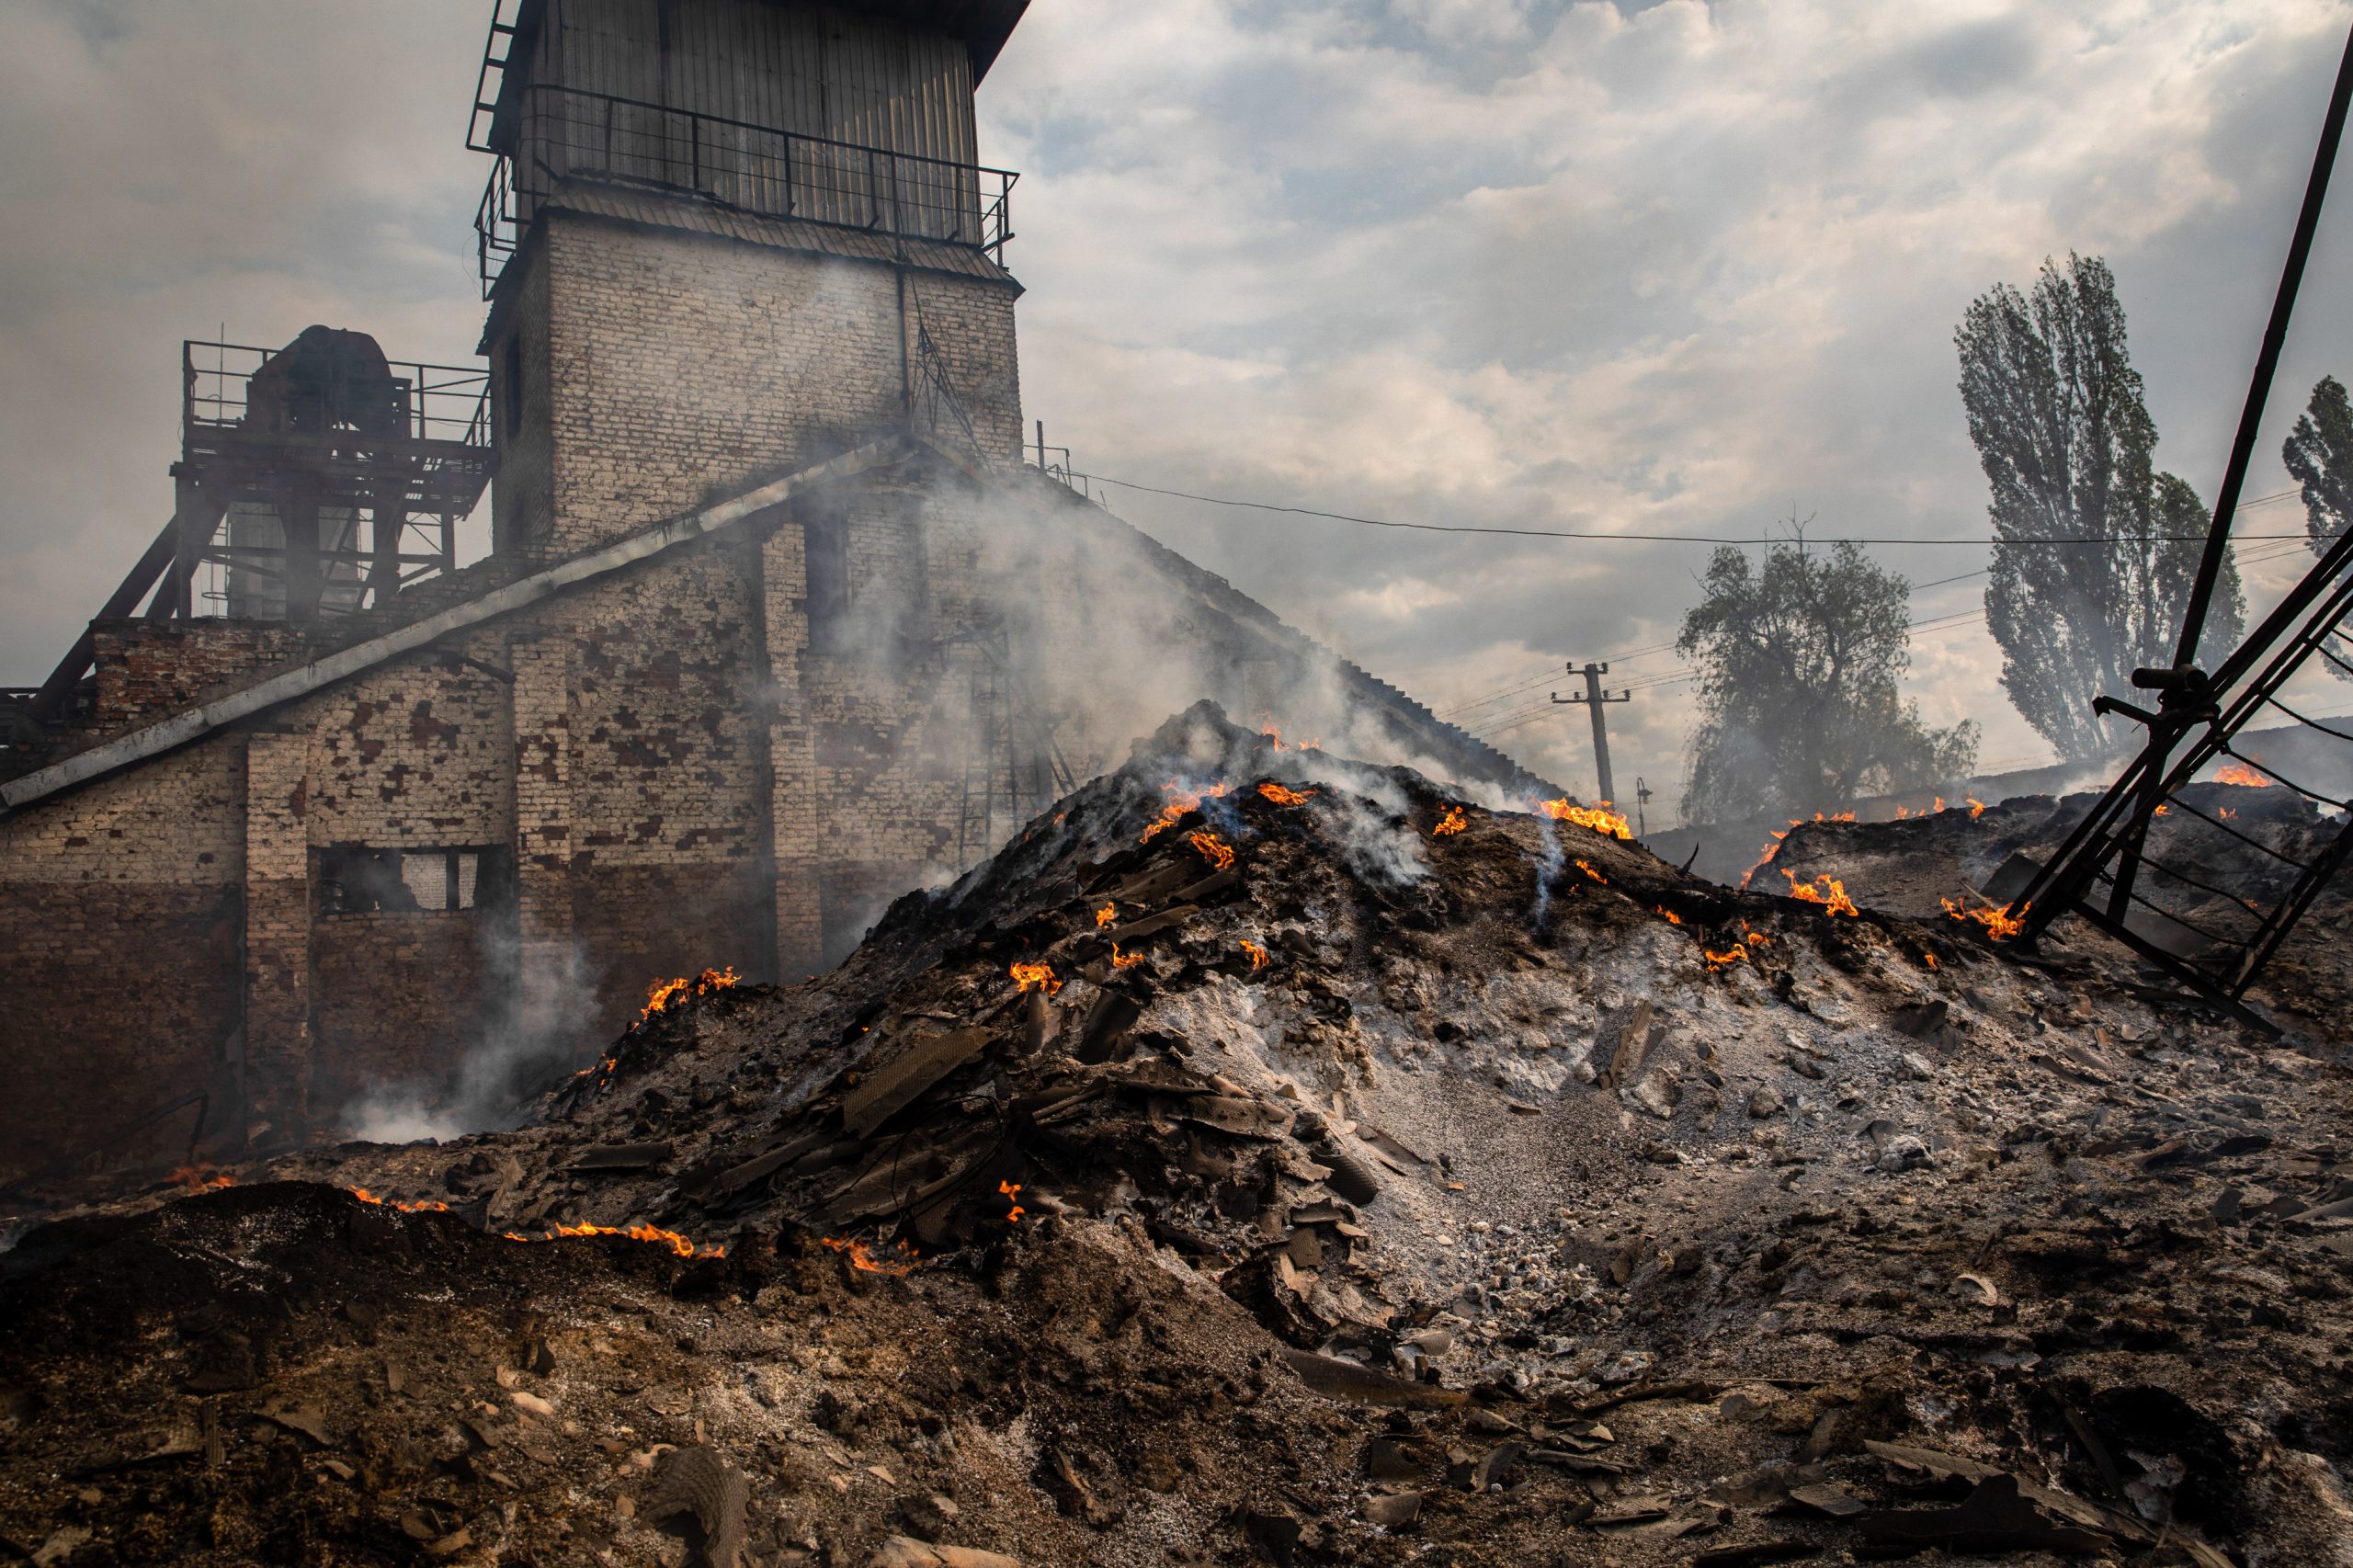 The ashes of burnt grain can be seen in a grain silo in the town of Sivers’k, Donbas in May 2022. Photo: Alex Chan / SOPA Images / Sipa USA / Reuters